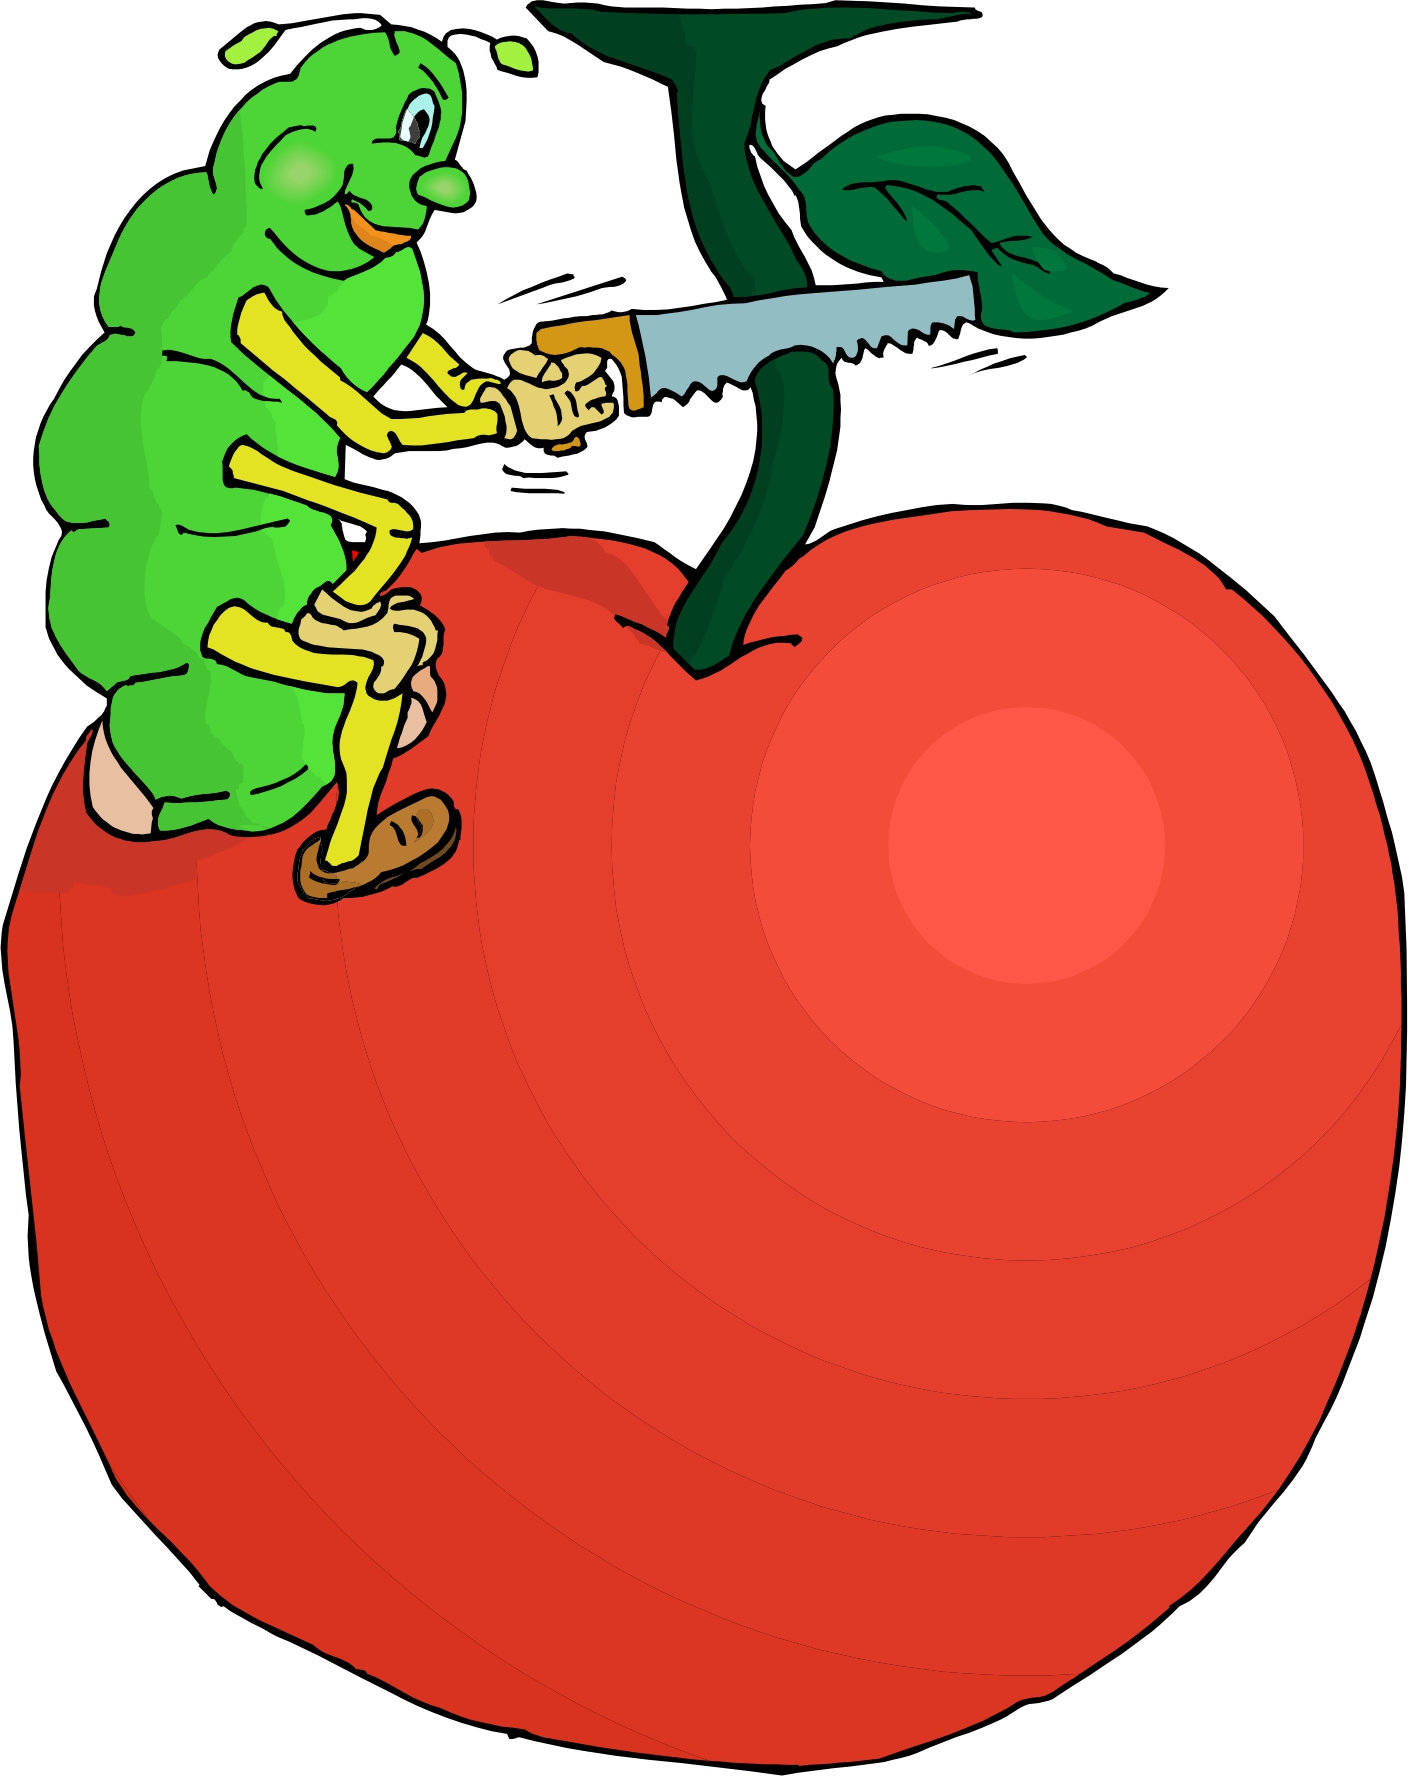 free apple picking clipart - photo #18